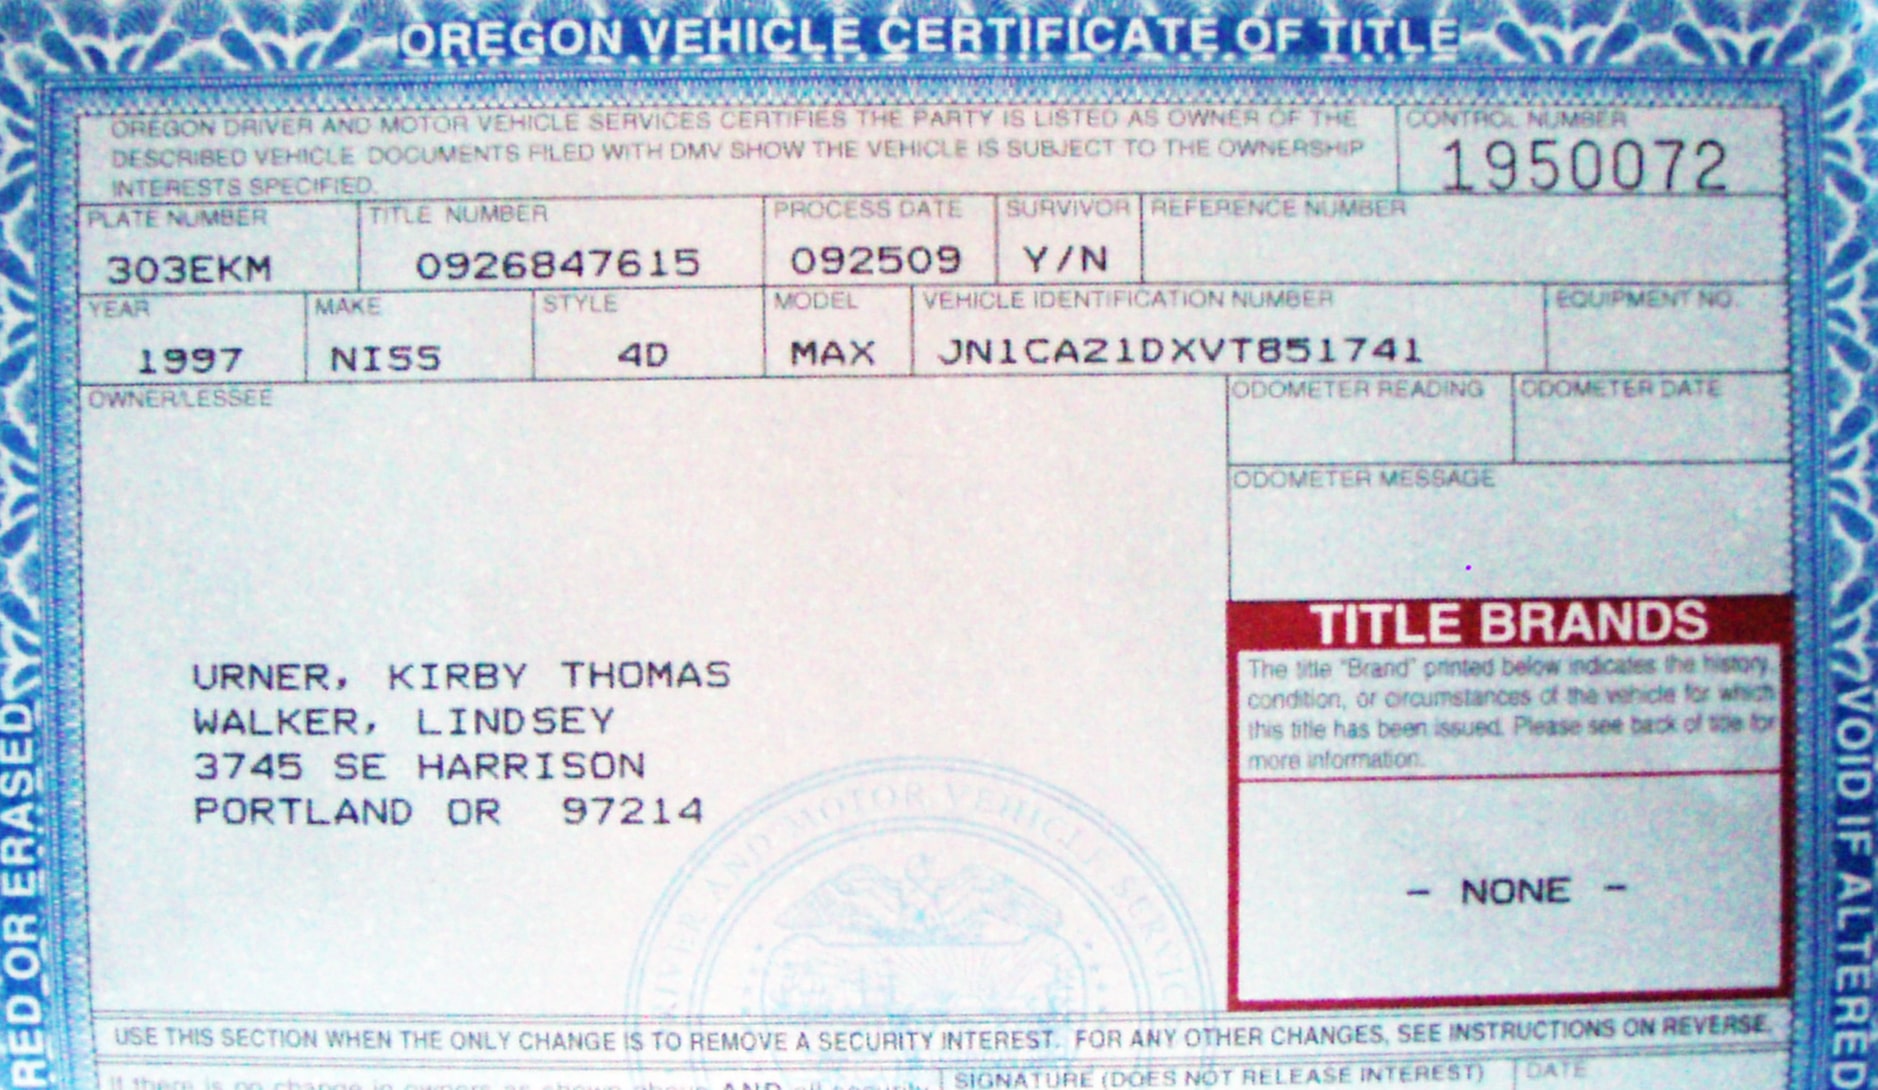 Certificate of Title